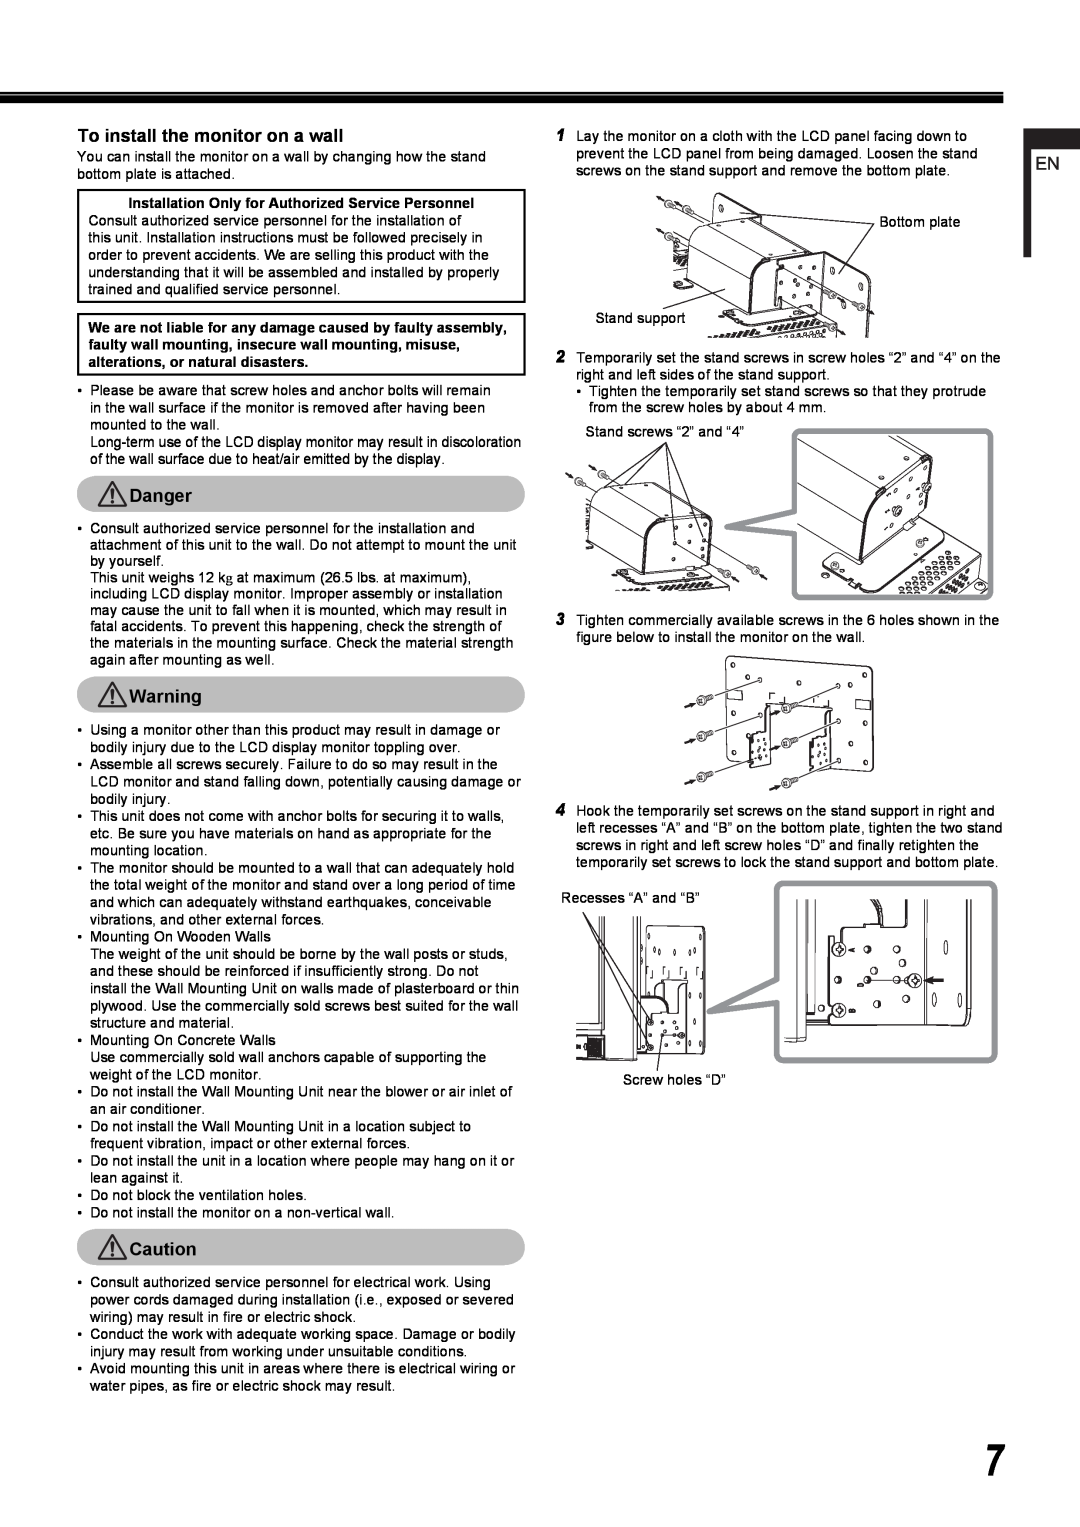 JVC DT-R24L4D, DT-R17L4D user service To install the monitor on a wall, Danger 